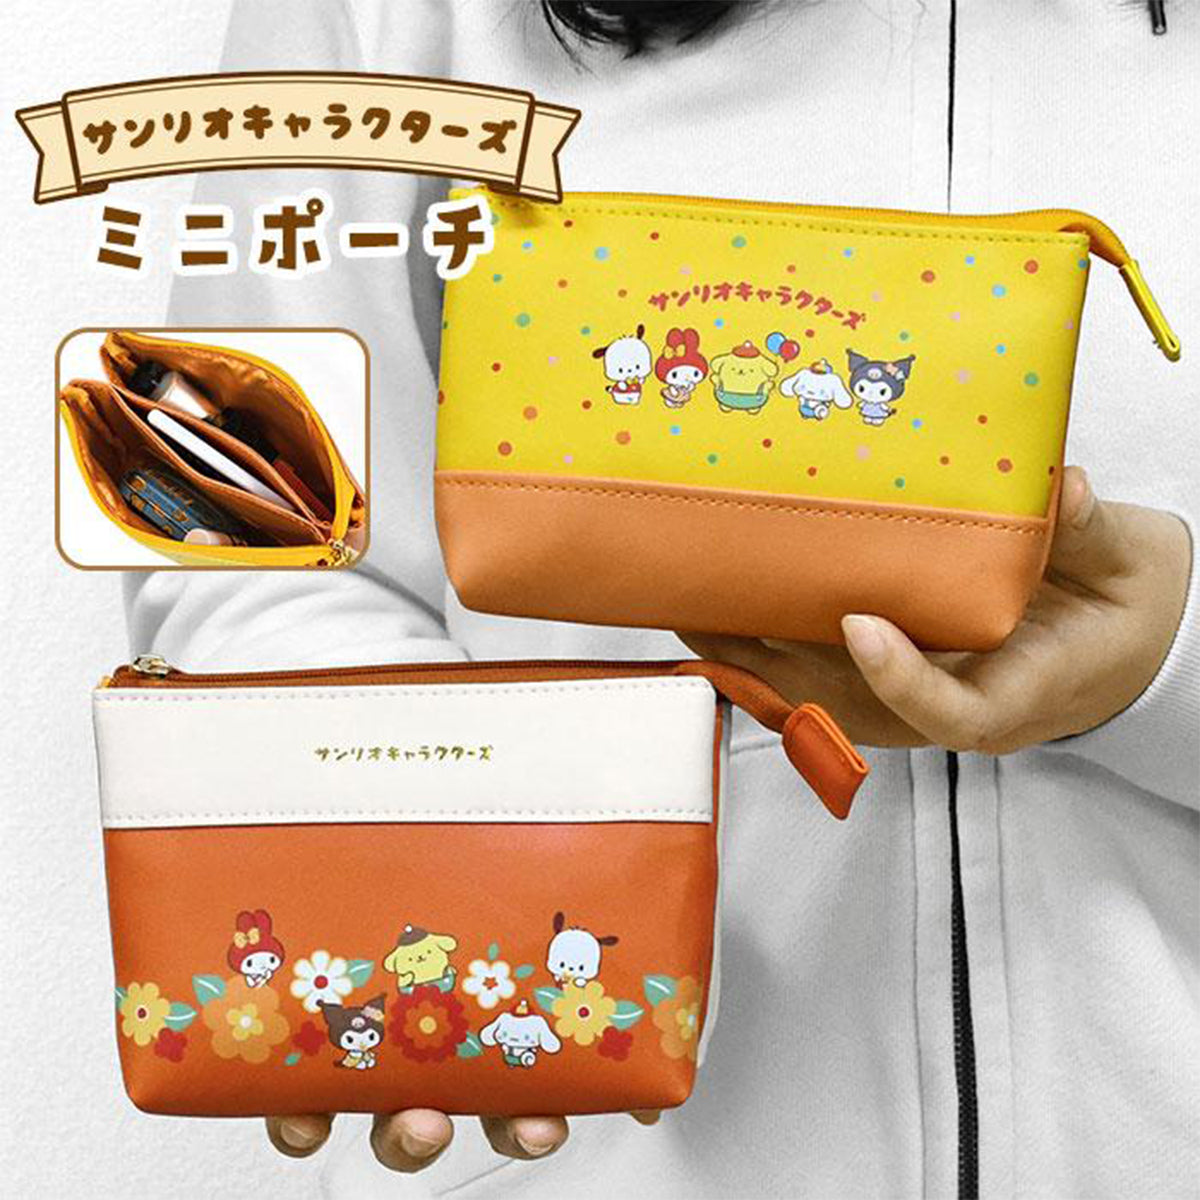 Twin Pouch - Sanrio Characters (Japan Edition)